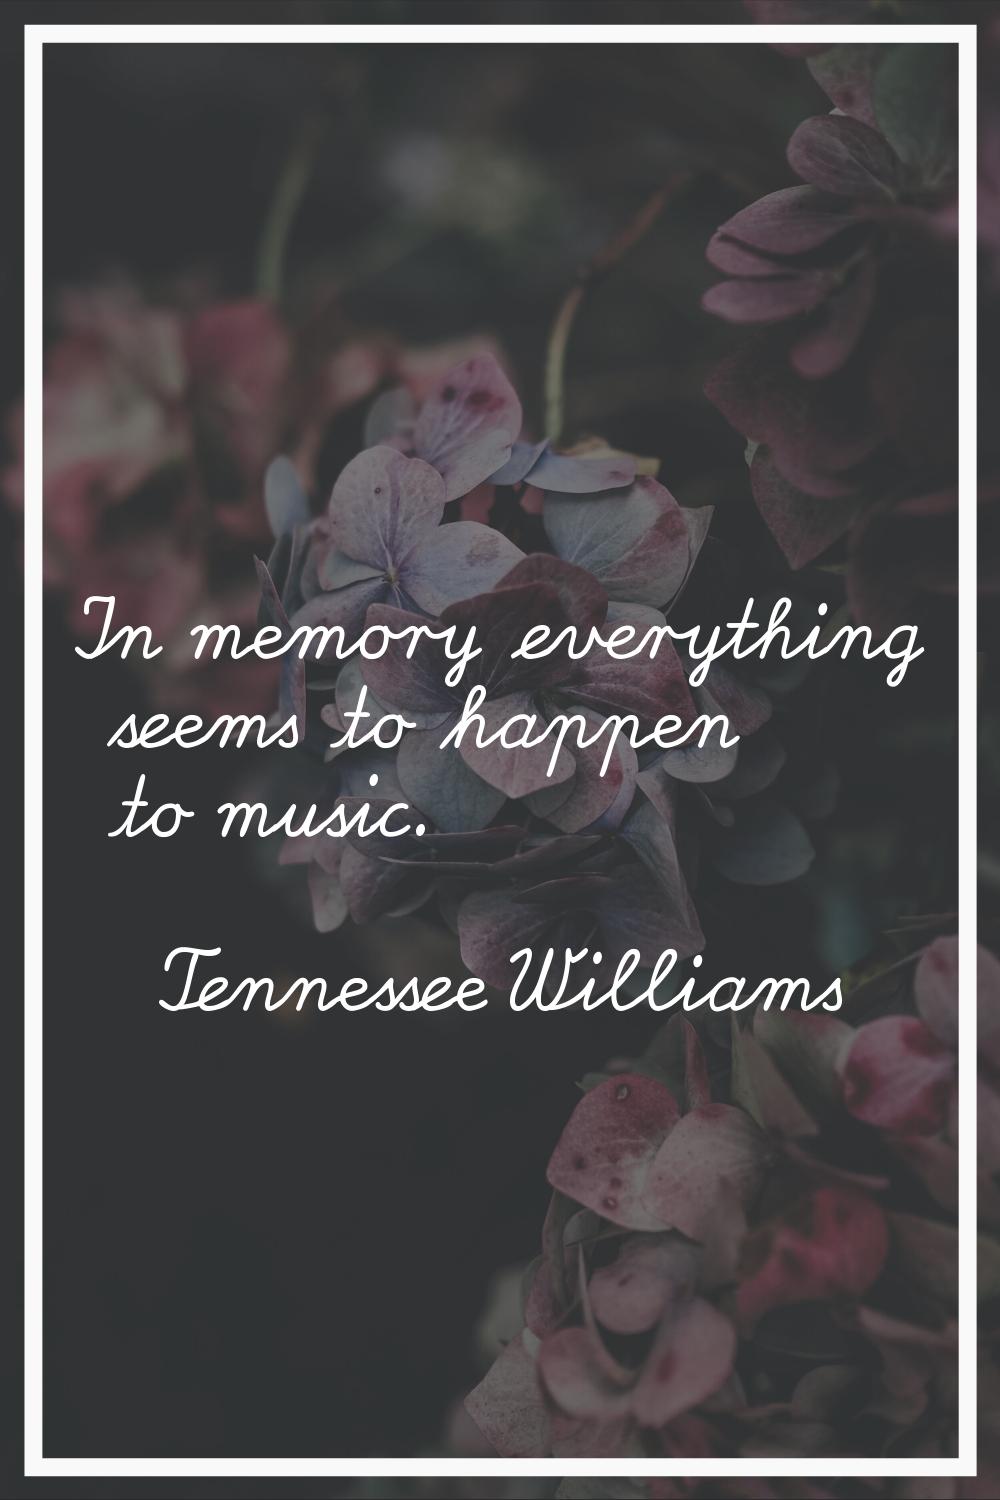 In memory everything seems to happen to music.